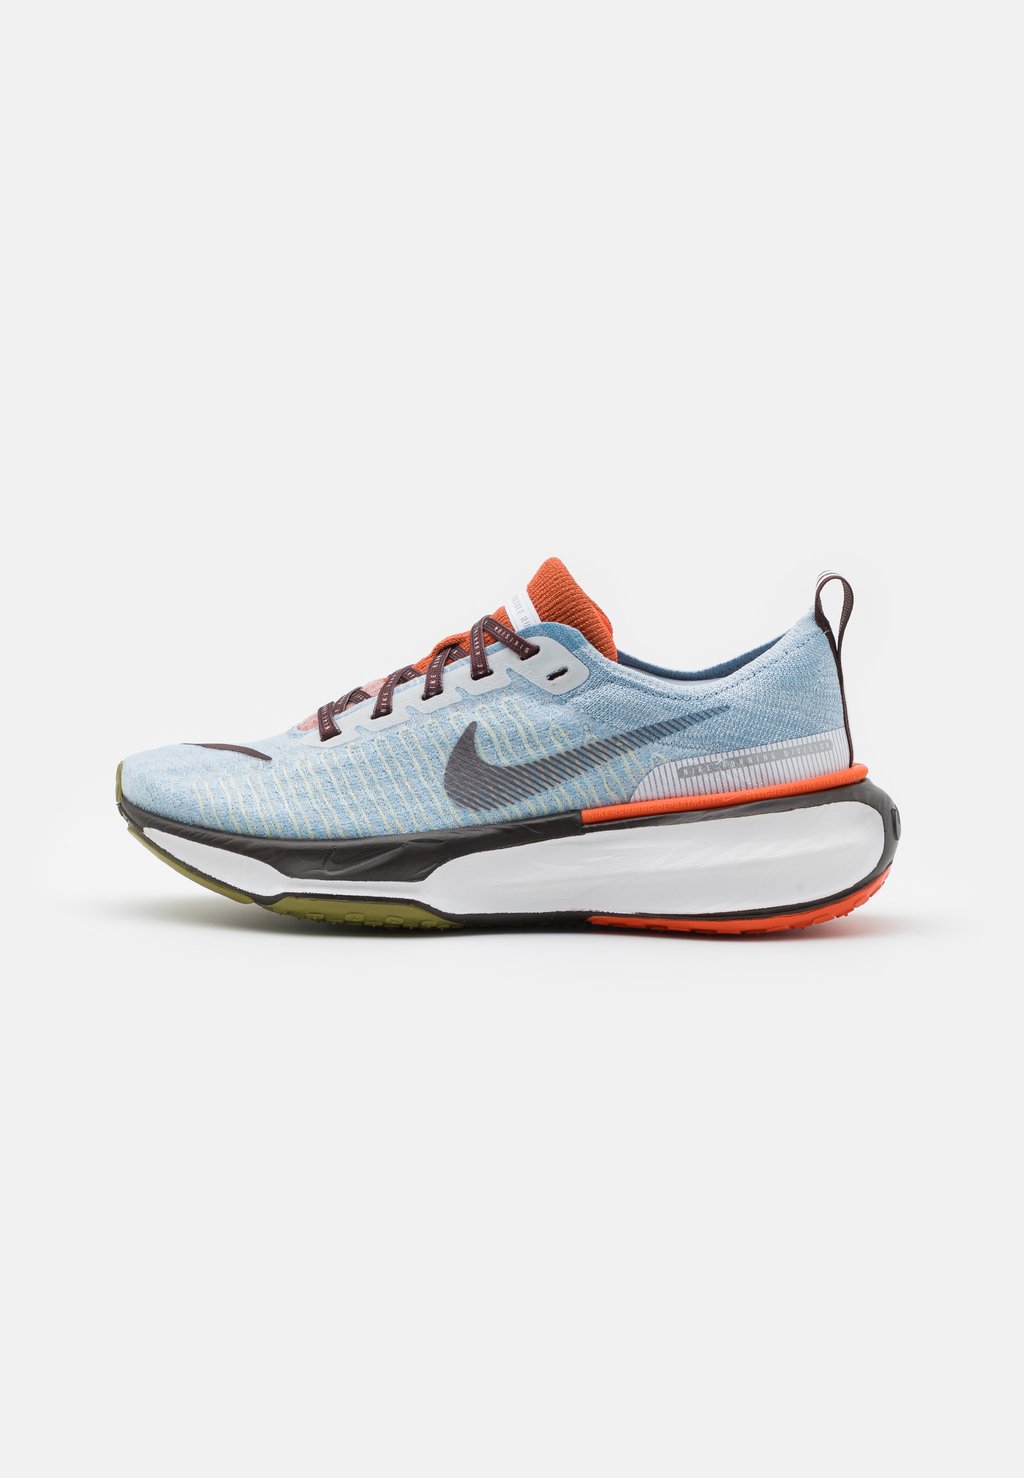 Нейтральные кроссовки ZOOMX INVINCIBLE RUN FK 3 Nike, цвет light armory blue/earth/cosmic clay/white/olive aura/pacific moss